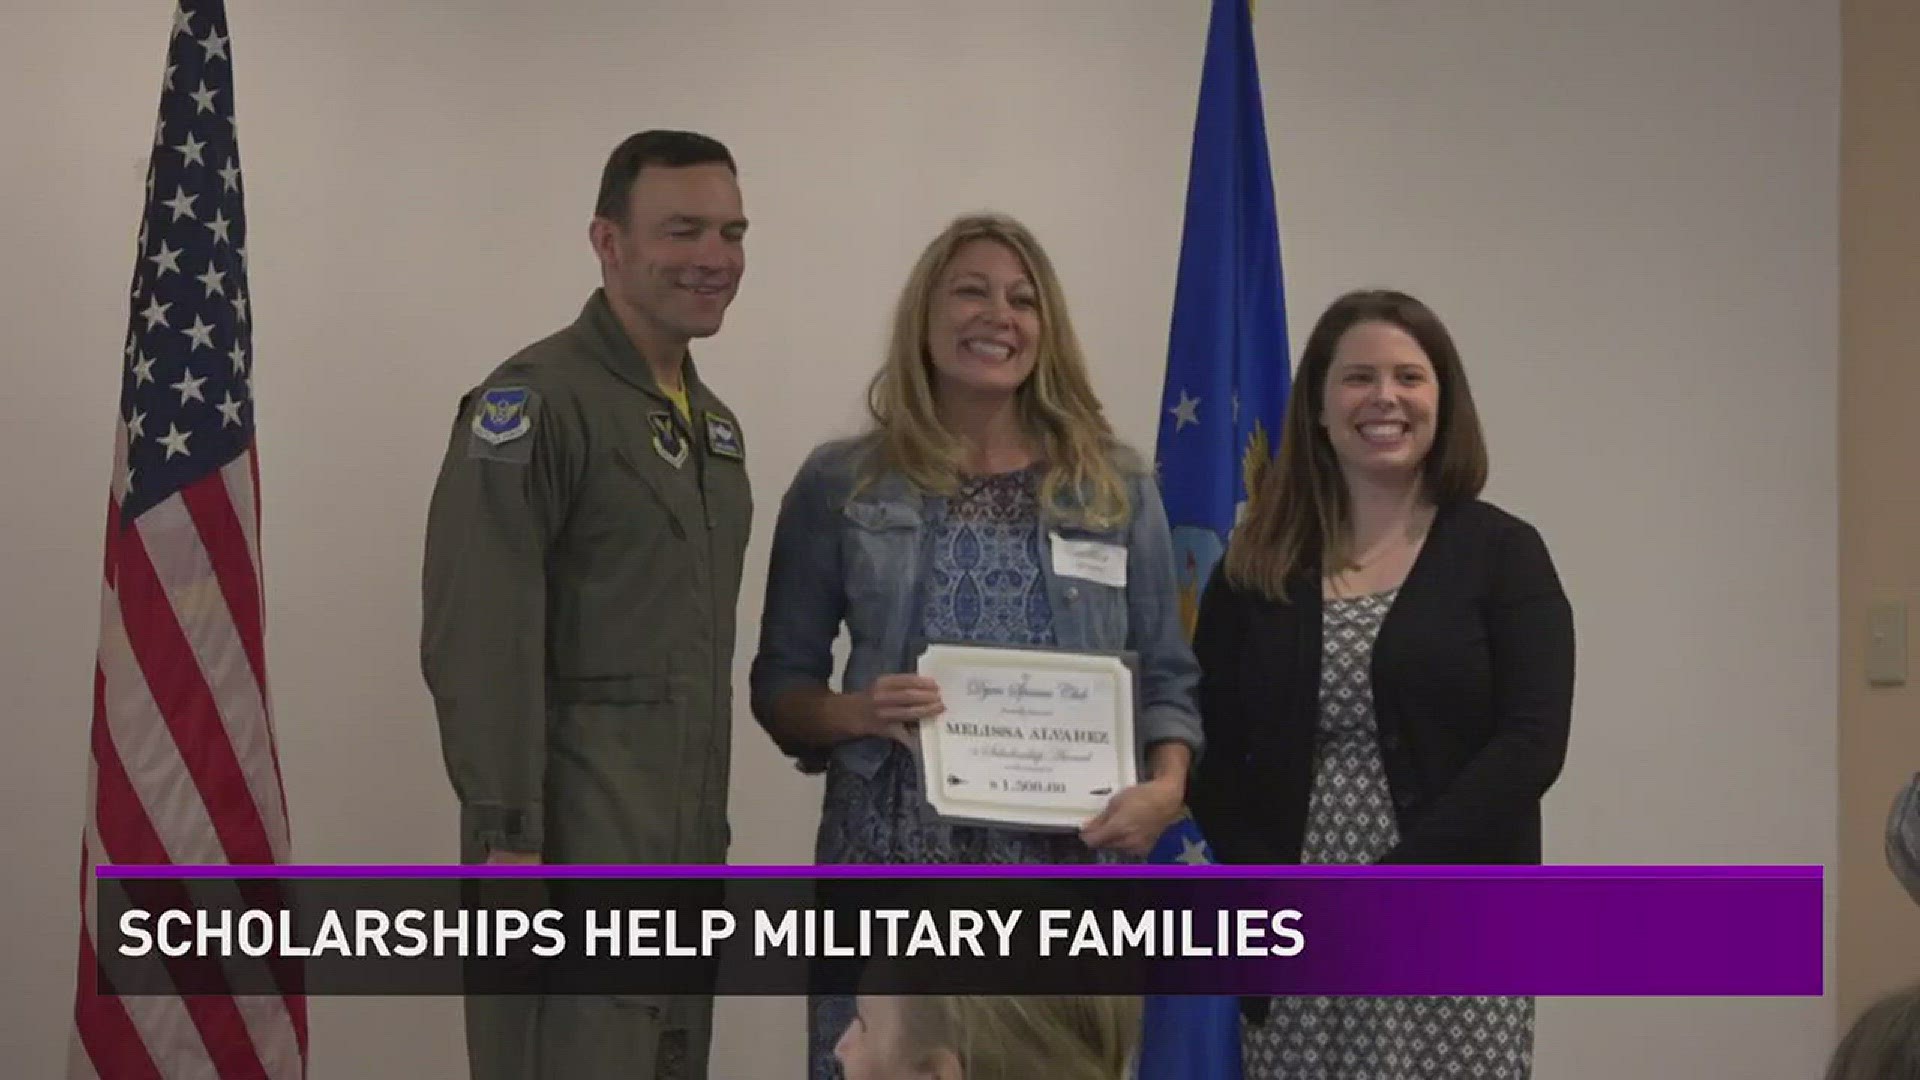 Thousands of dollars was raised to send Dyess Air Force Base dependents to college.